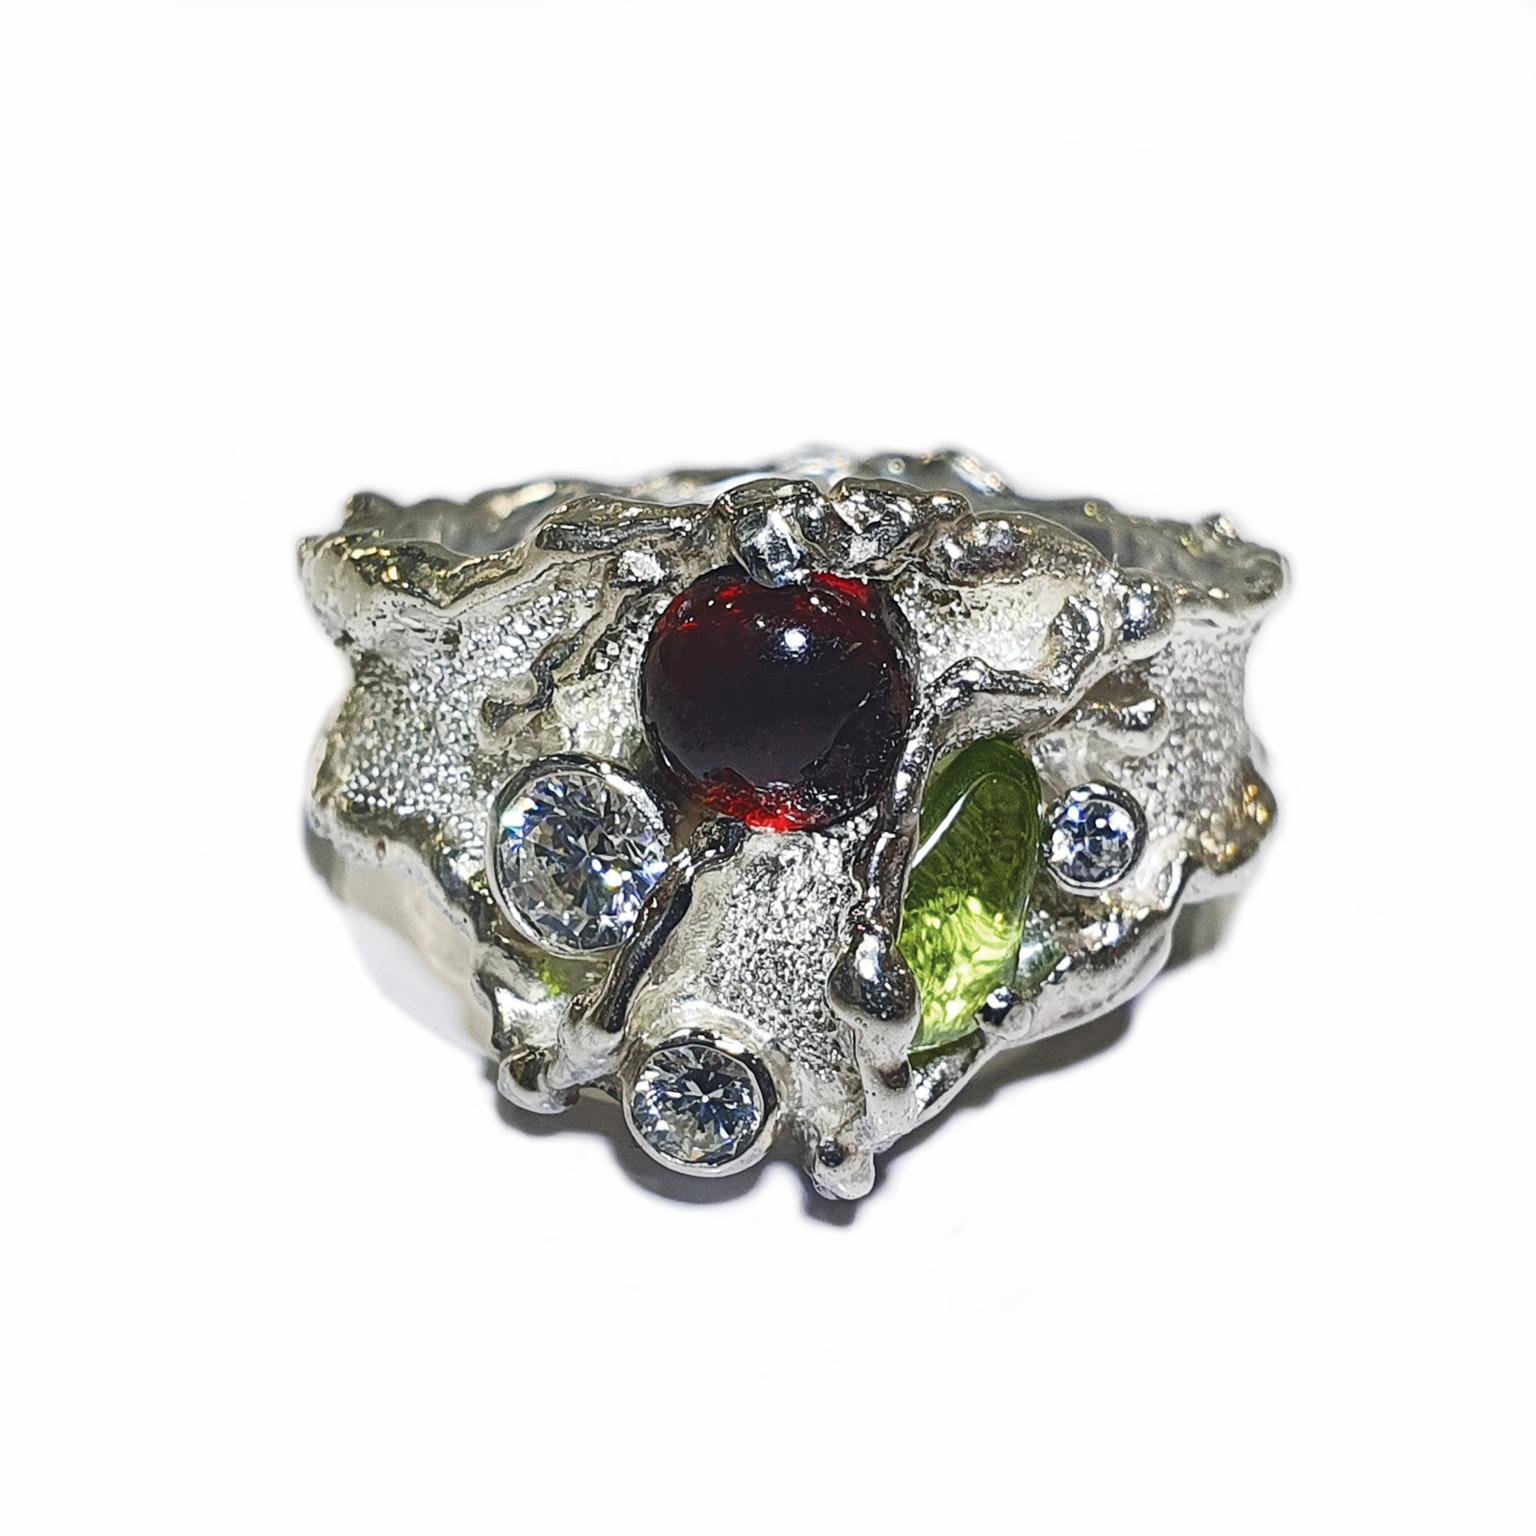 Paul Amey’s Molten Edge Sterling silver ring was crafted from tarnish resistant Sterling Silver. The ring features white Swarovski crystals, a natural peridot crystal and a garnet cabochon. The ring is finished with Paul Amey’s signature texture.